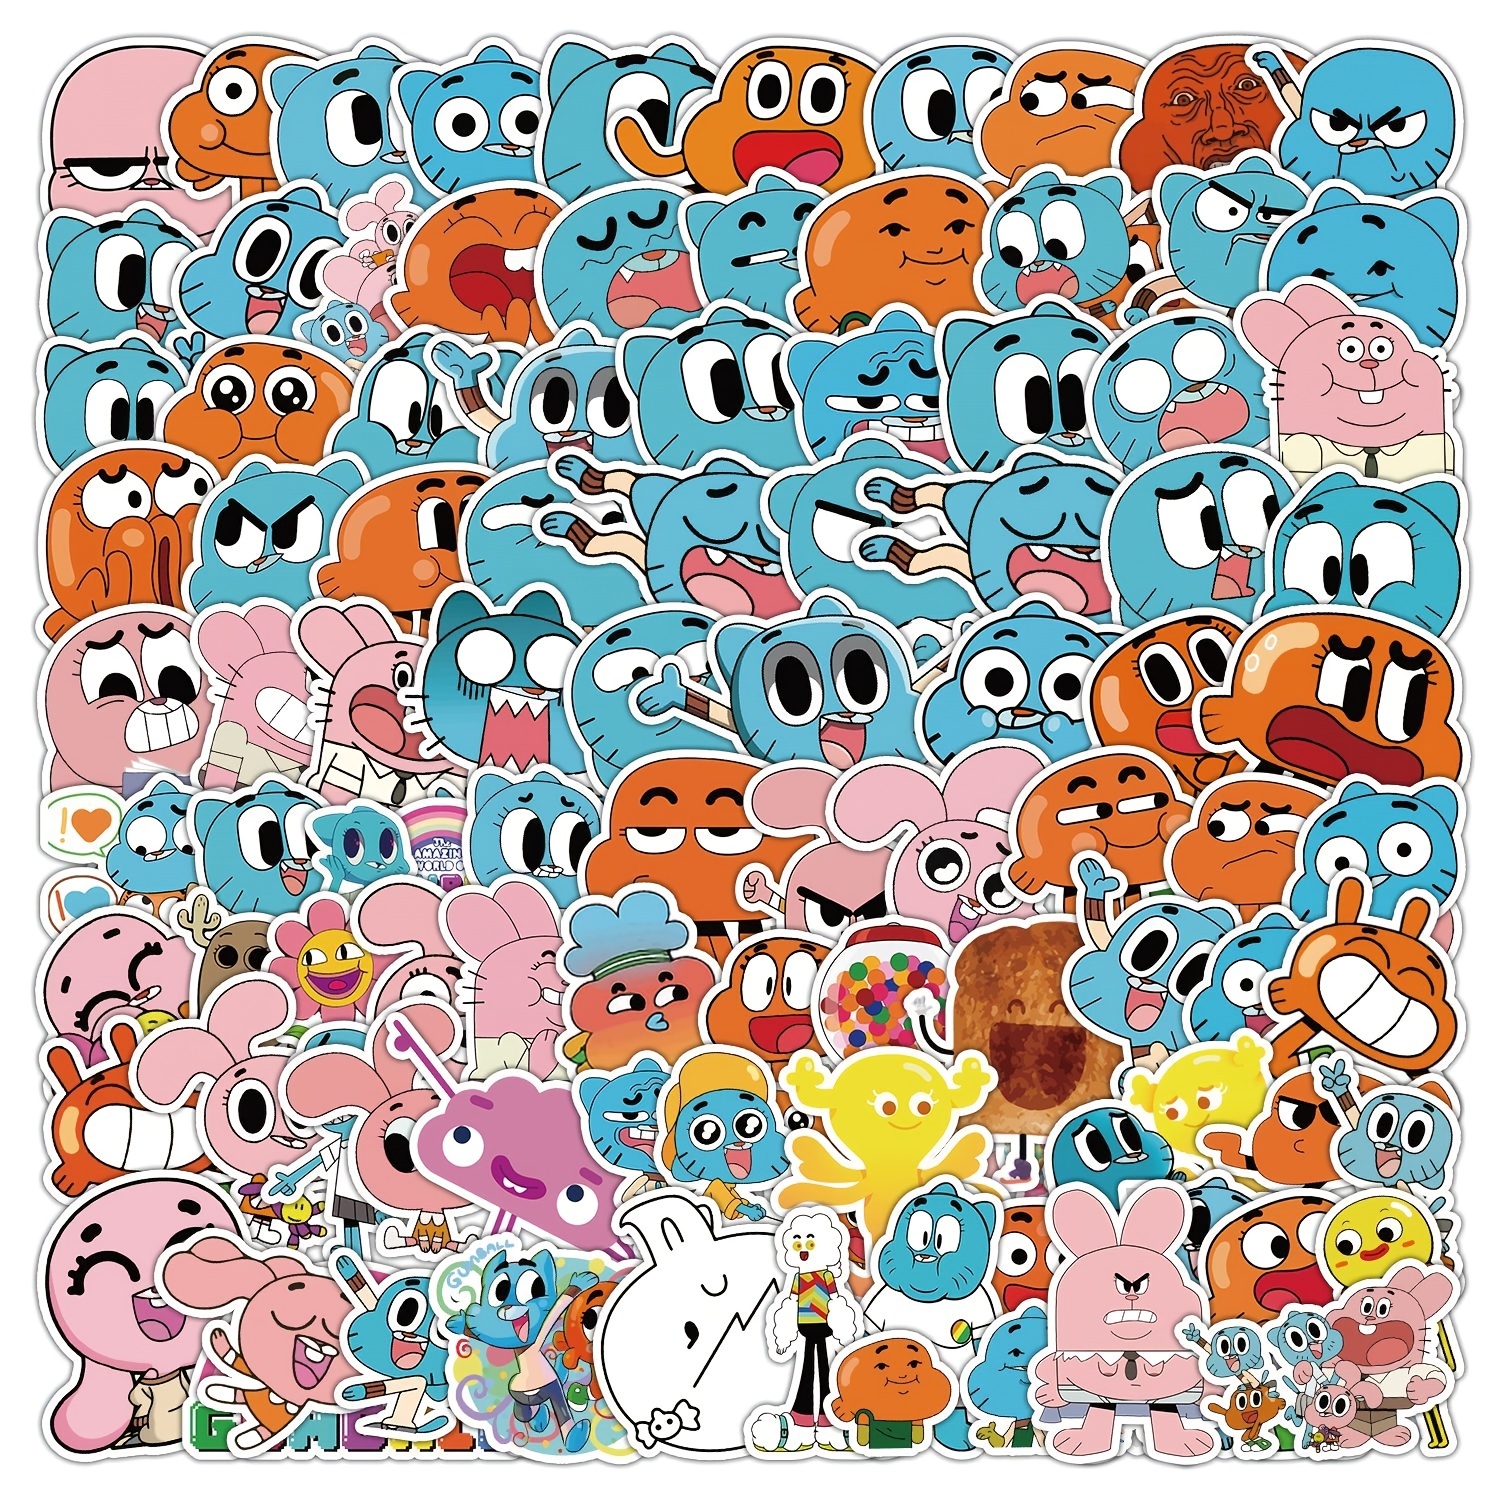 50pcs The Amazing World of Gumball Stickers|Vinyl Waterproof Stickers for  Laptop,Car Bumper，Luggage,Skateboard,Water Bottles,Computer,Phone, Teens